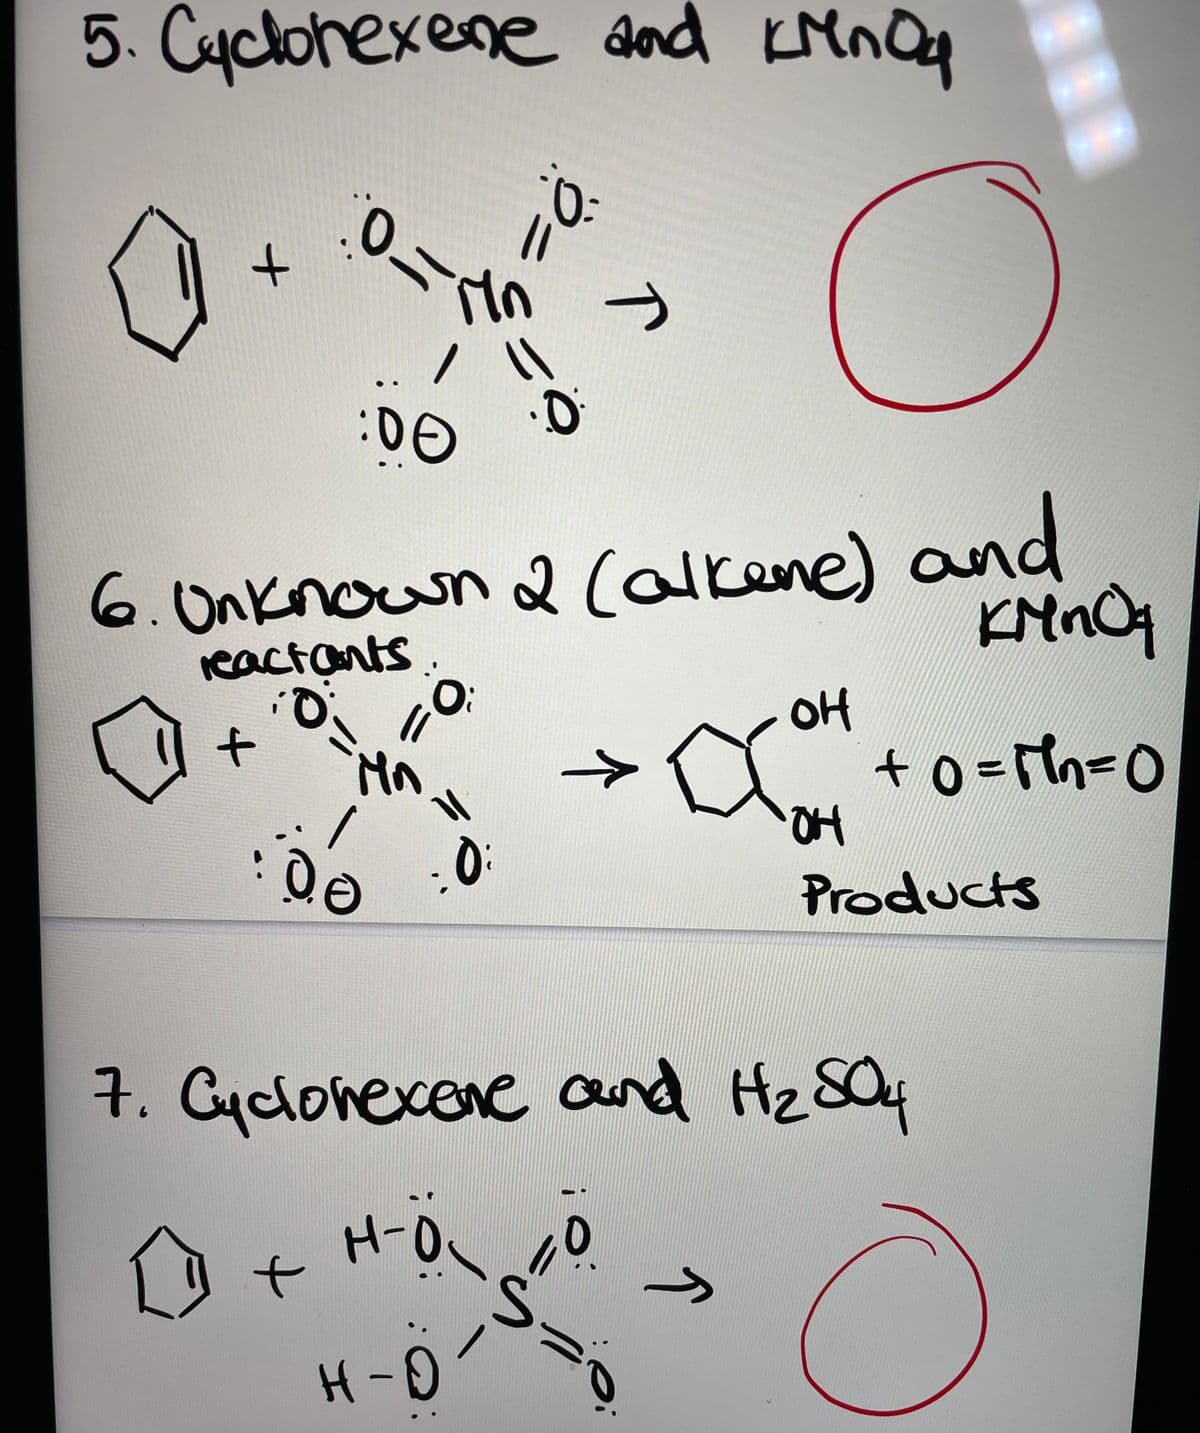 5. Cychonexene dnd KMNQ4
In
6.Onknown 2 Calkene)
reactants.
and
KMn
to
OH
Mr
Products
7. Gyclonexene and Hz SQu
H-O
to
1.
